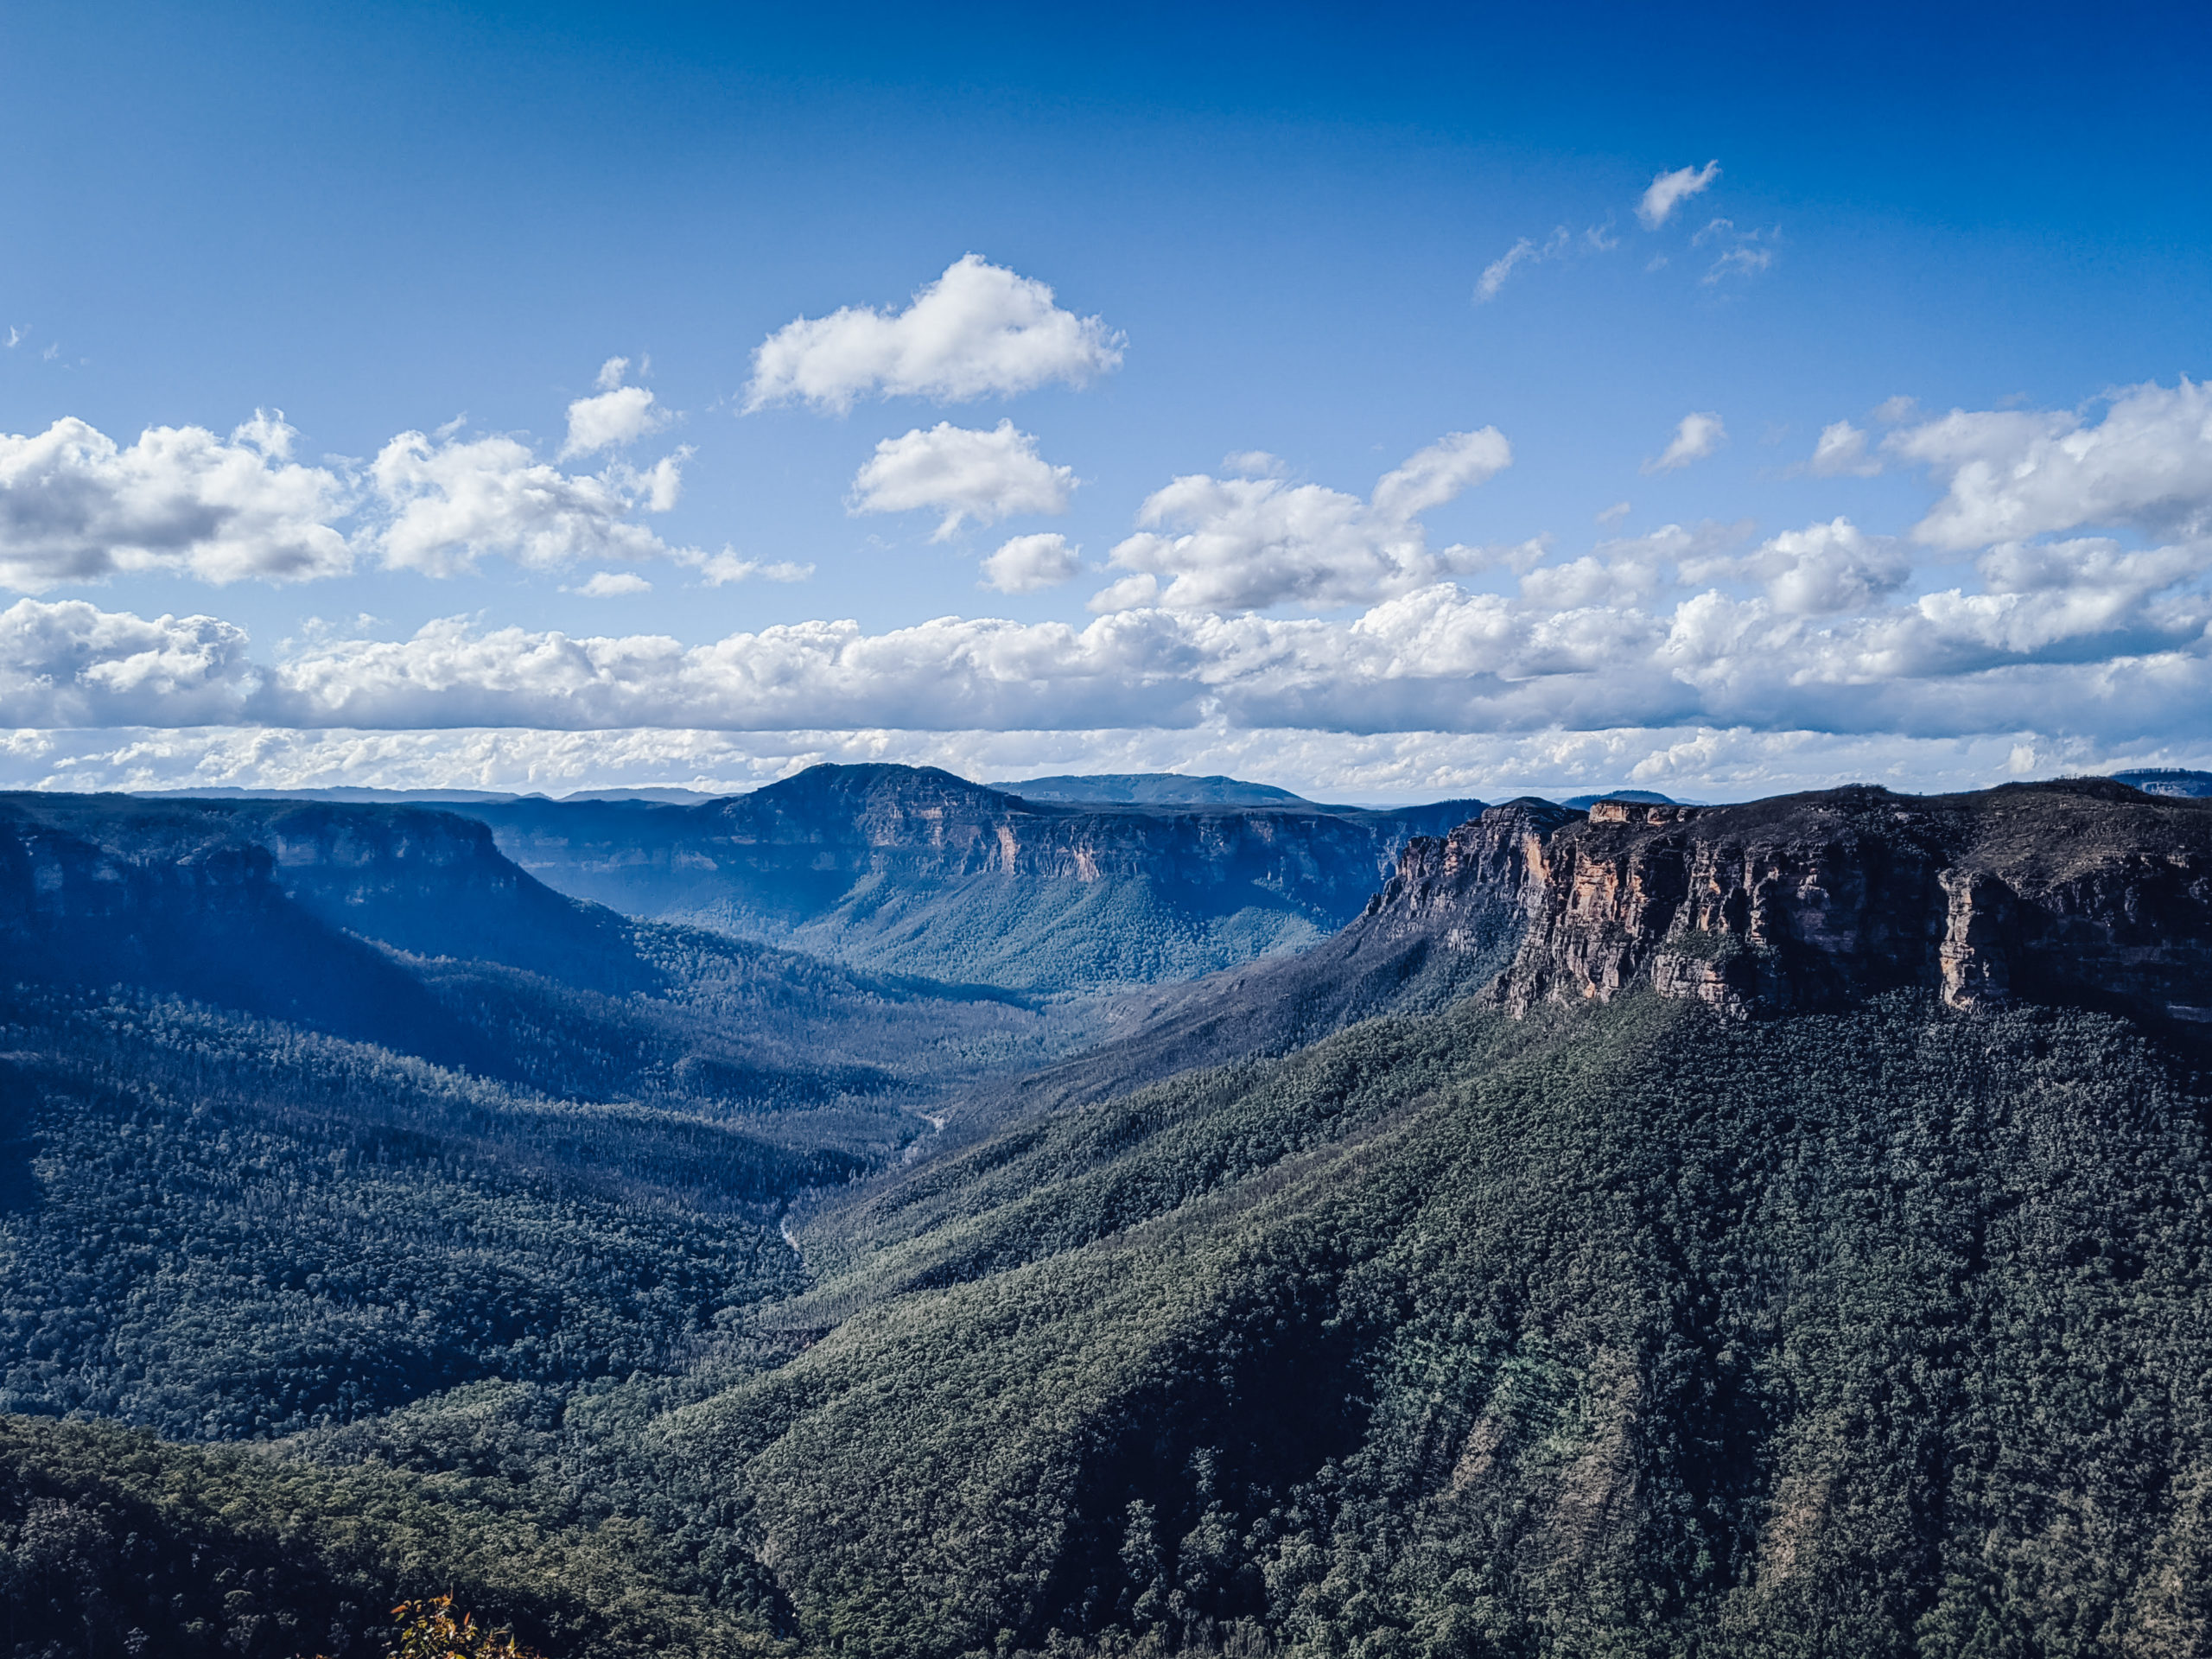 Camping in the Blue Mountains